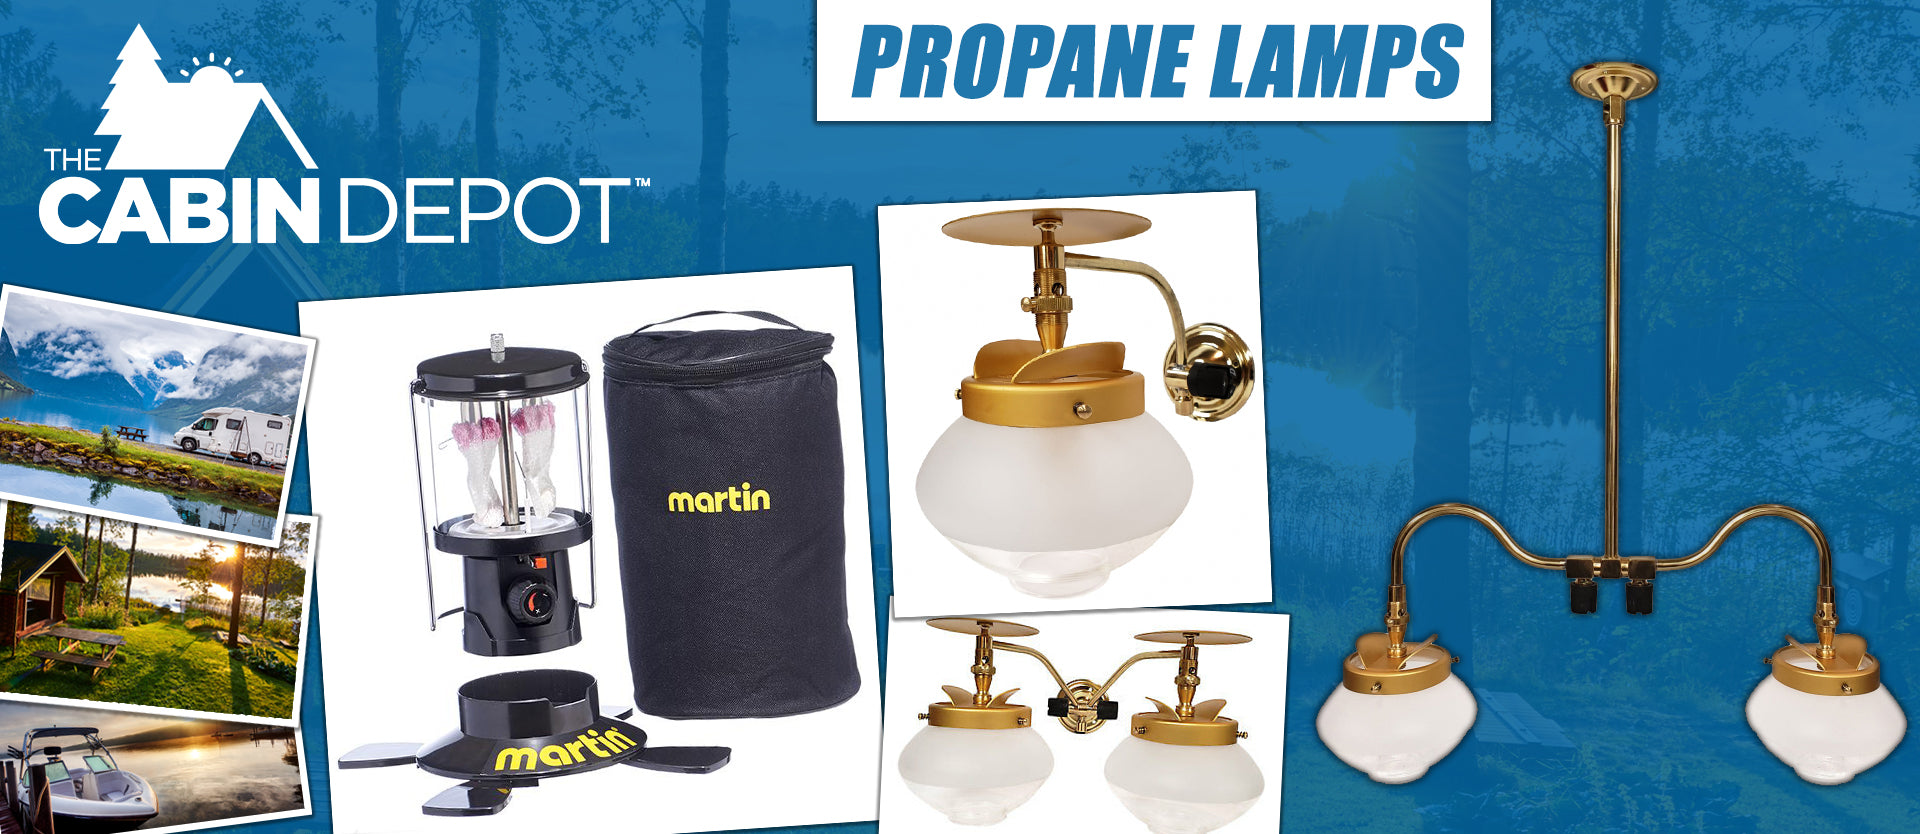 Propane Lamps Off Grid The Cabin Depot ™ Canada